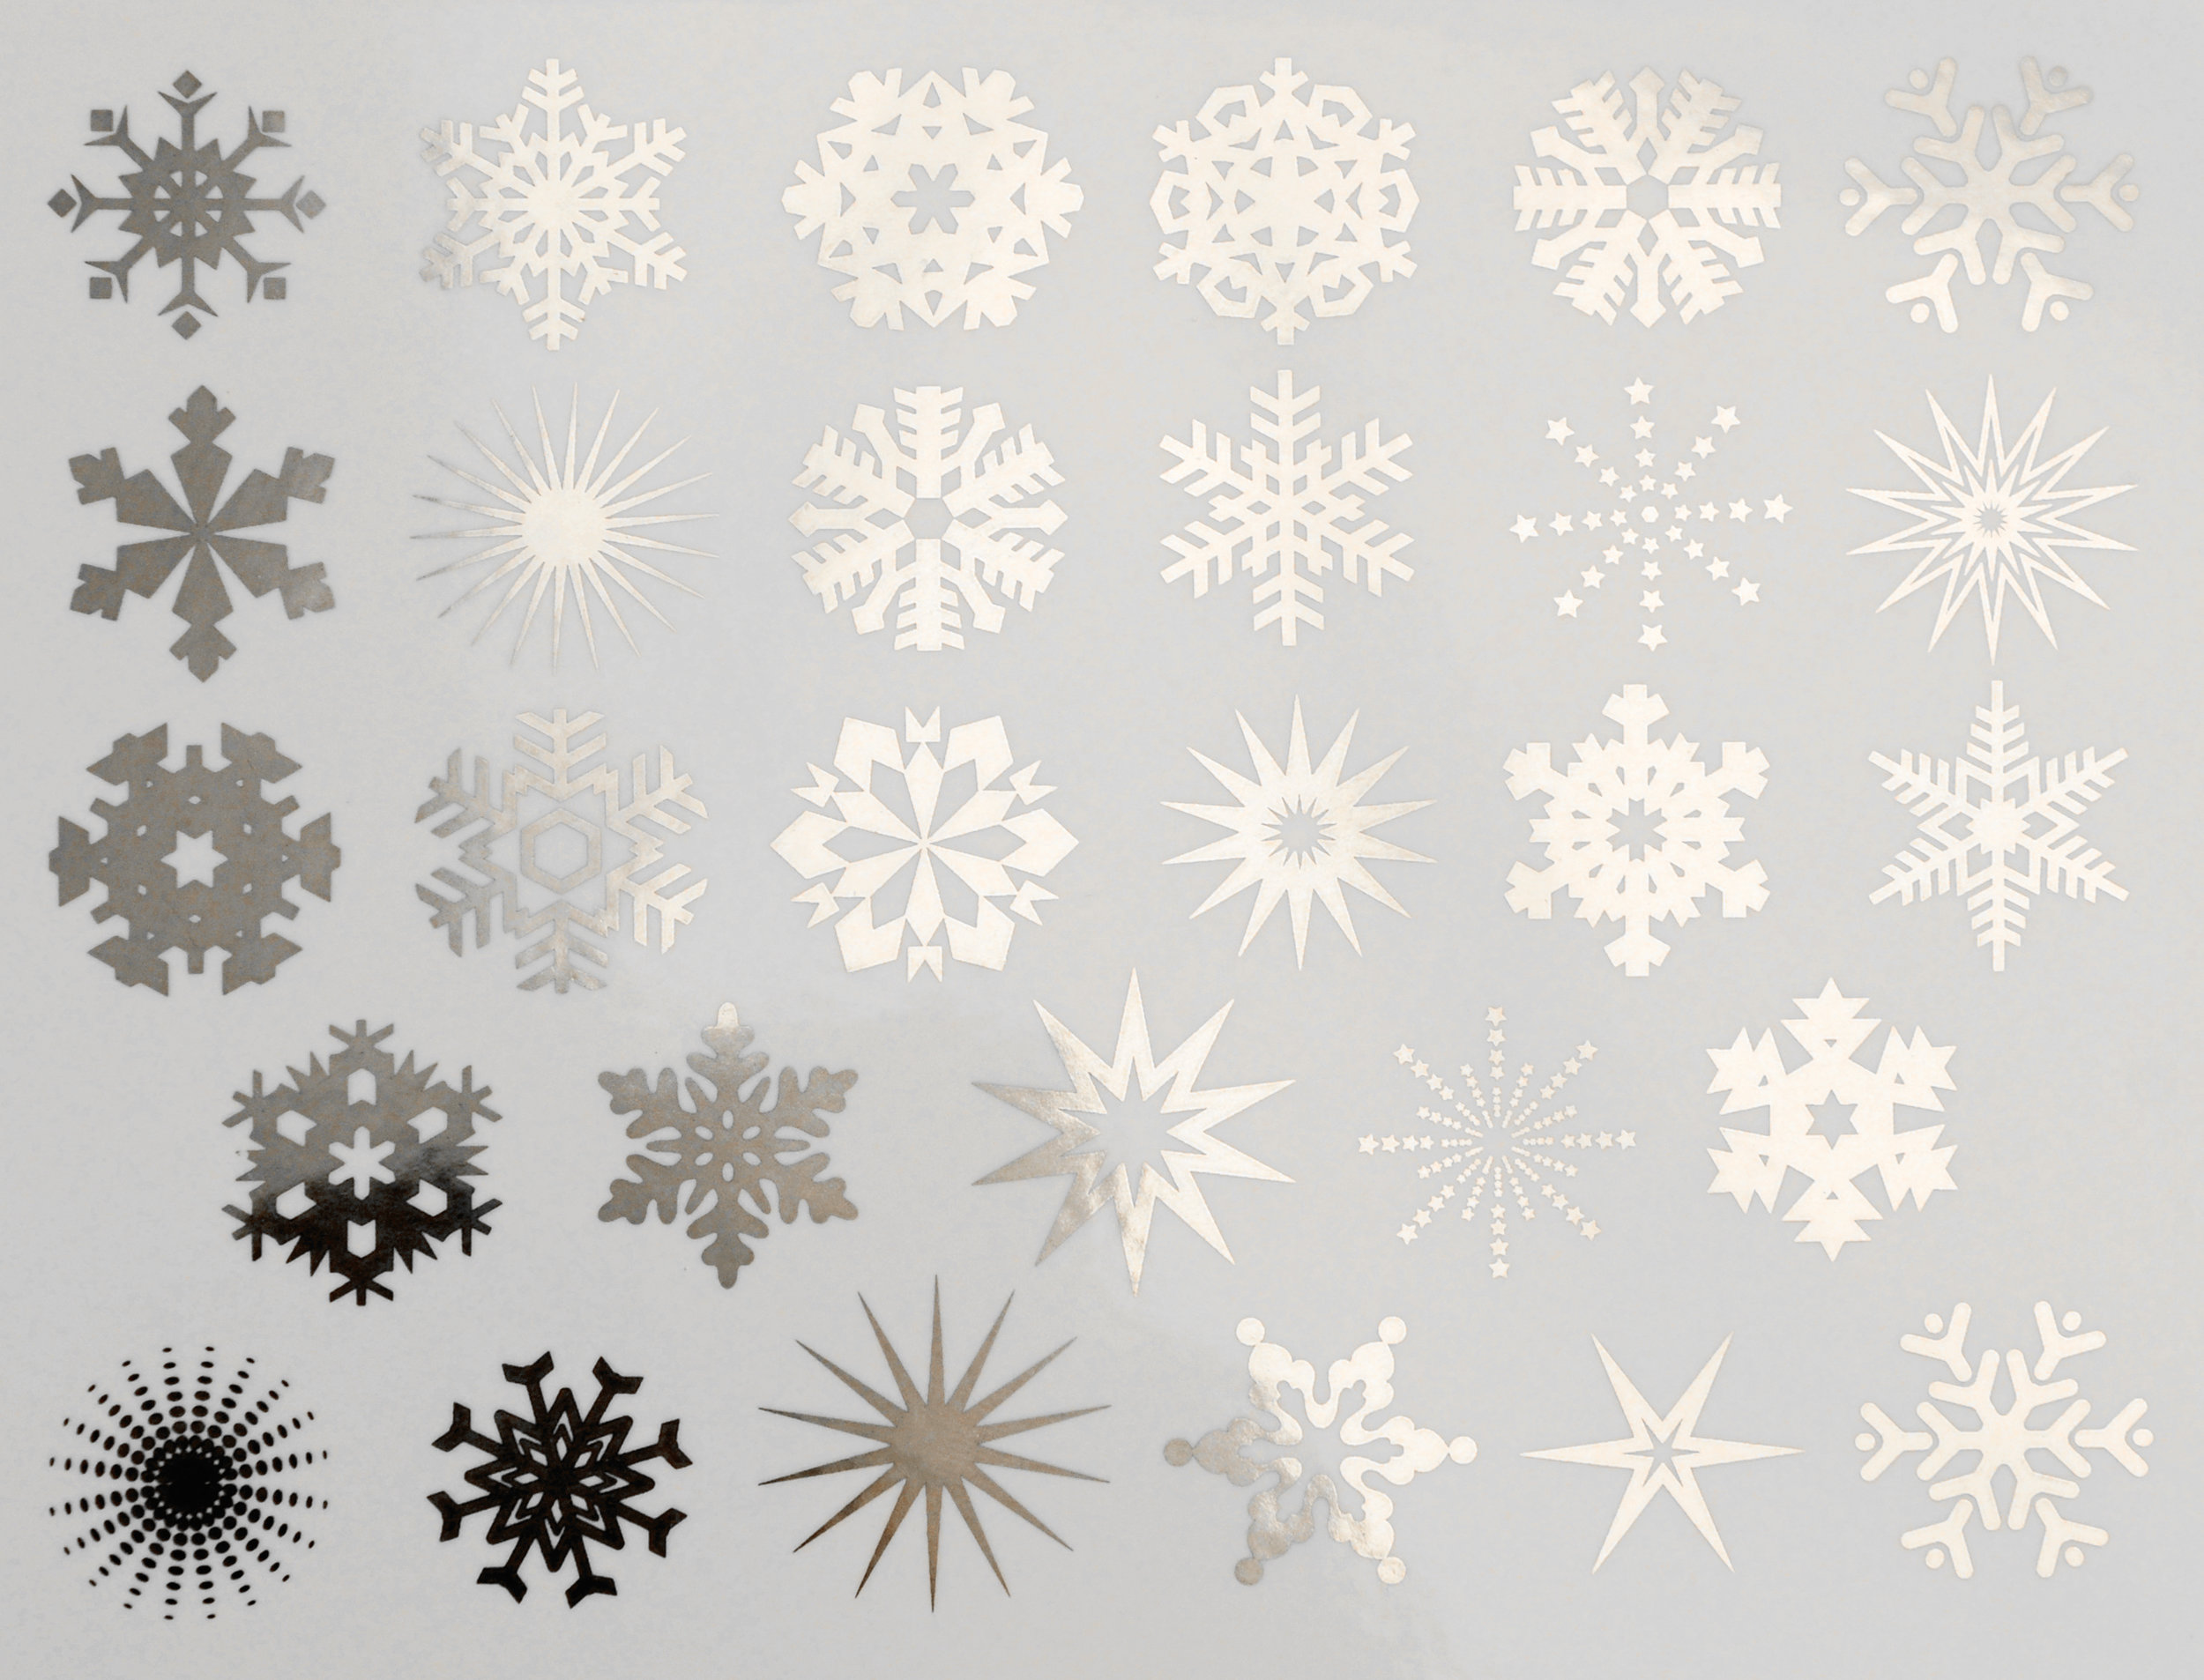 SALE-Snowflake Mix Pack -6 sheets Decals for Glass, Ceramic or Enamel —  Ceramic Decals, Glass Fusing Decals